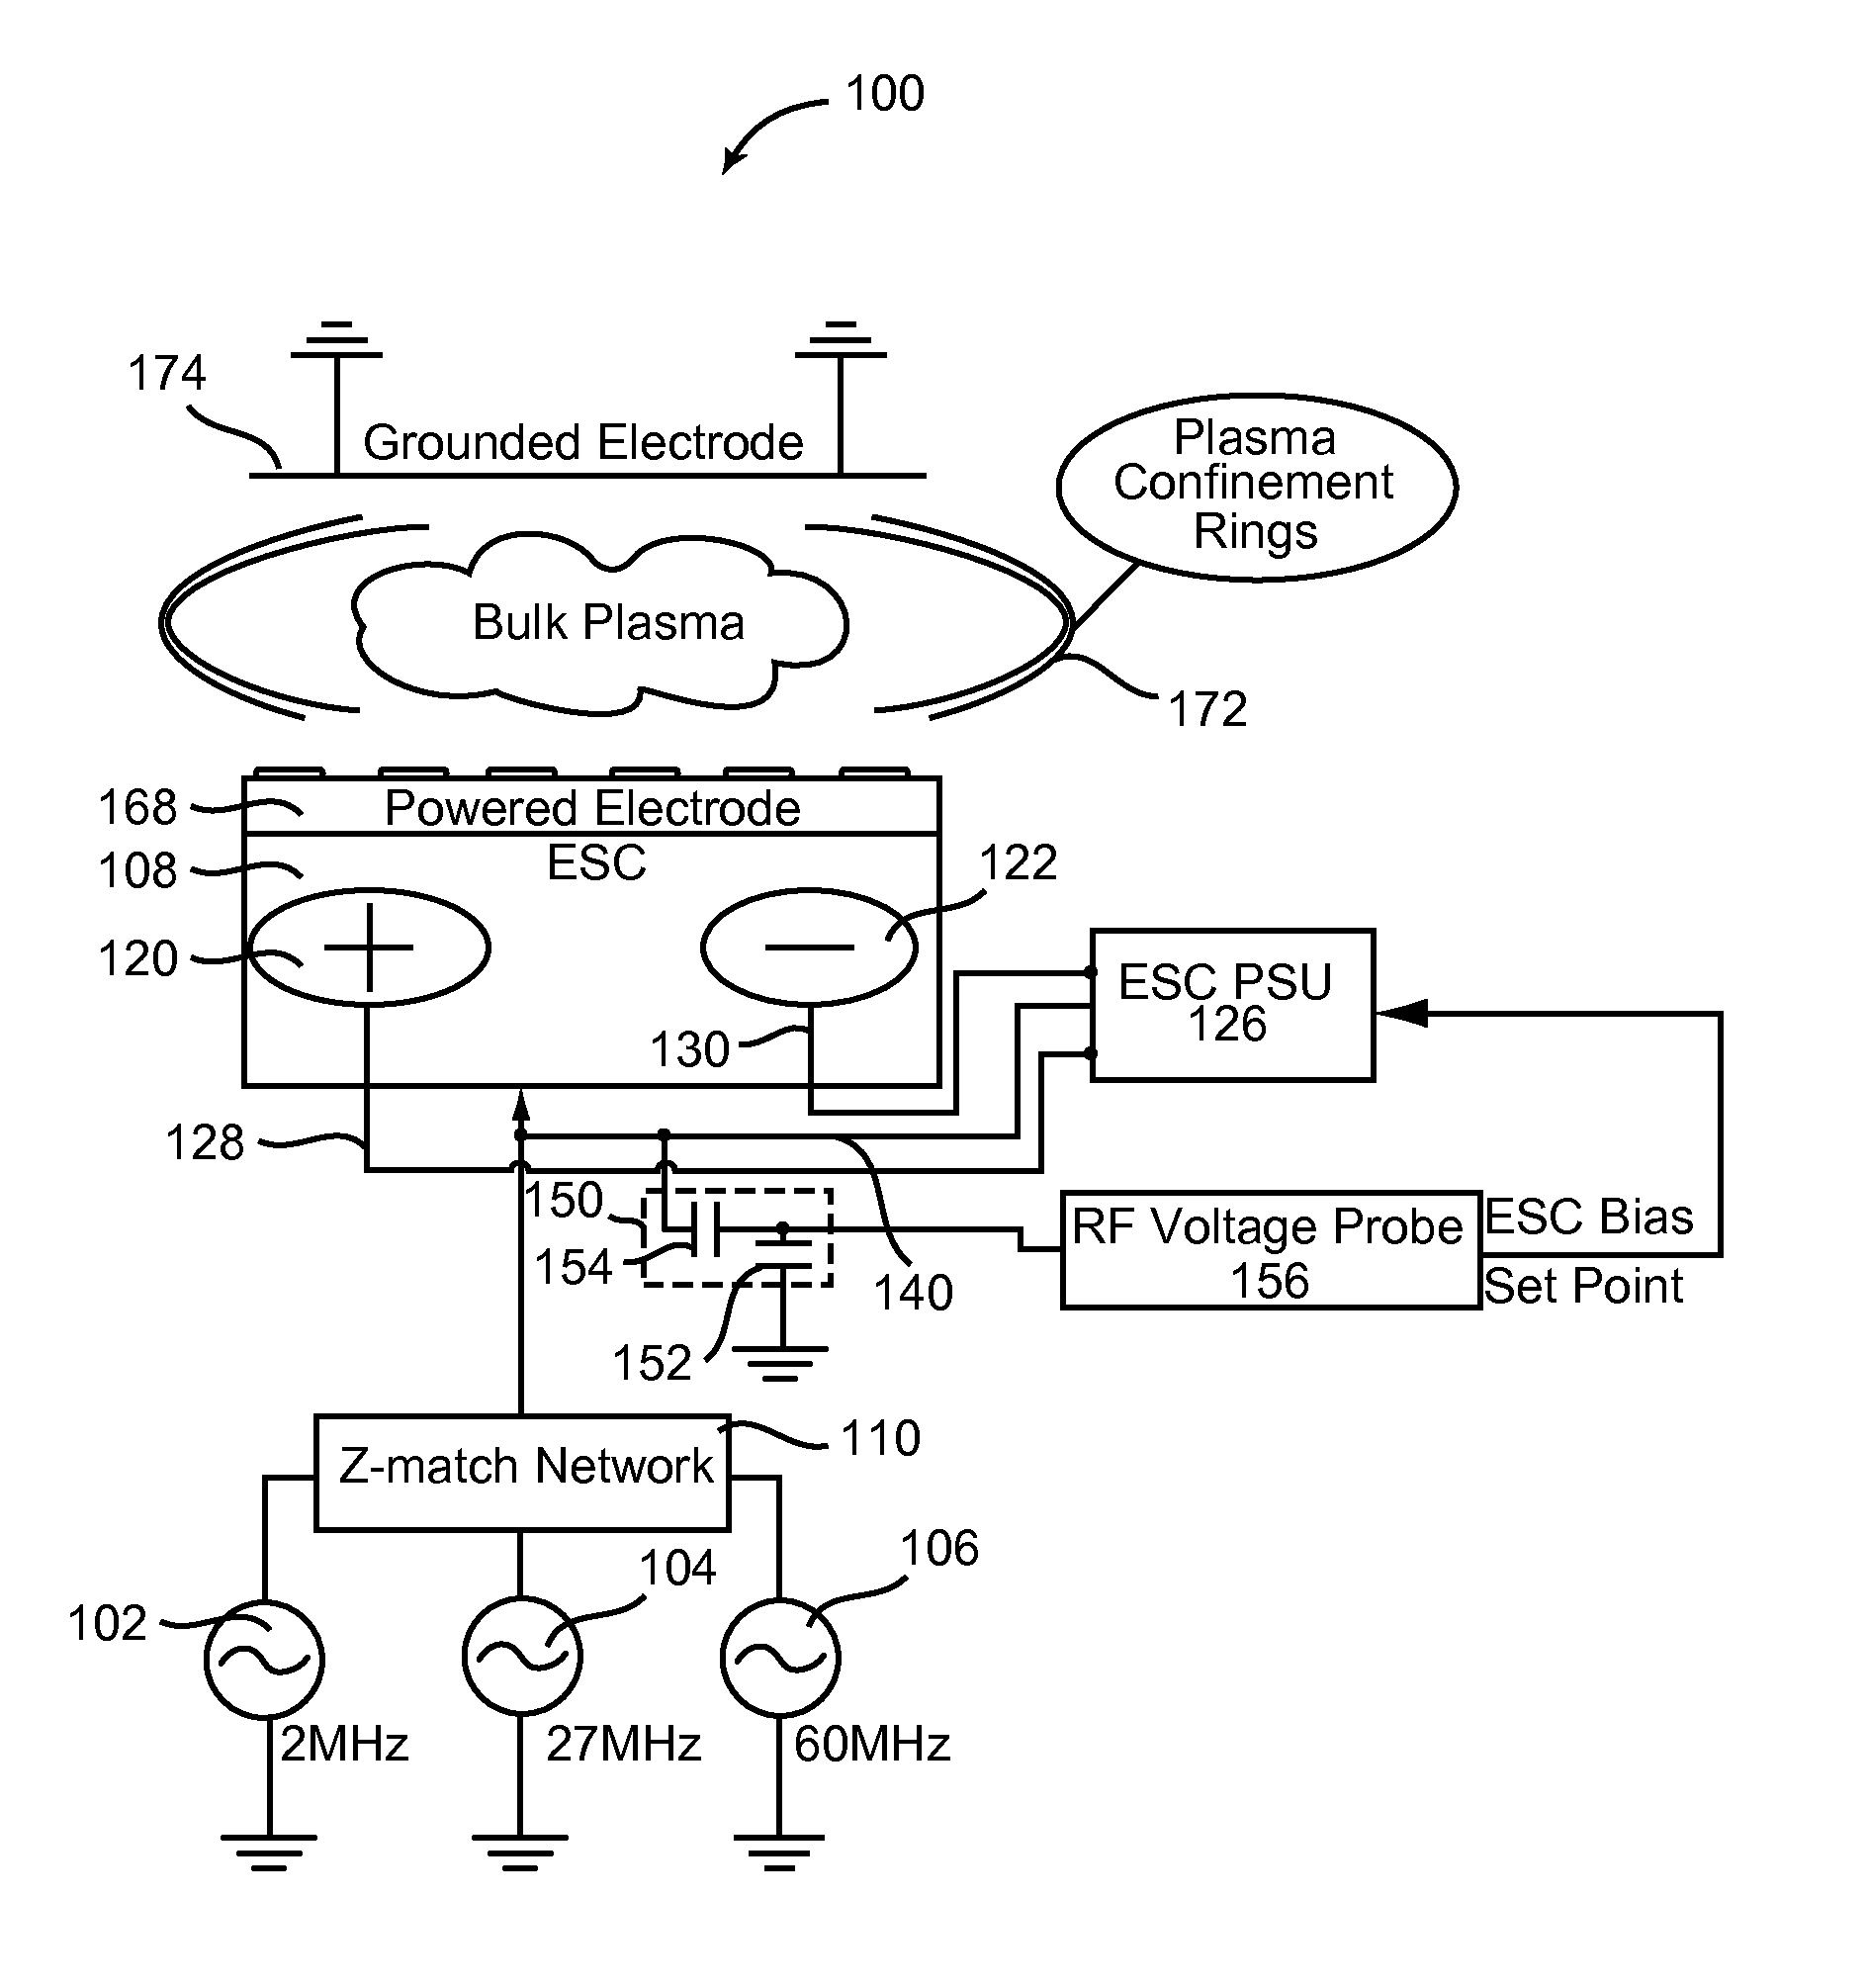 Methods and apparatus for detecting the confinement state of plasma in a plasma processing system